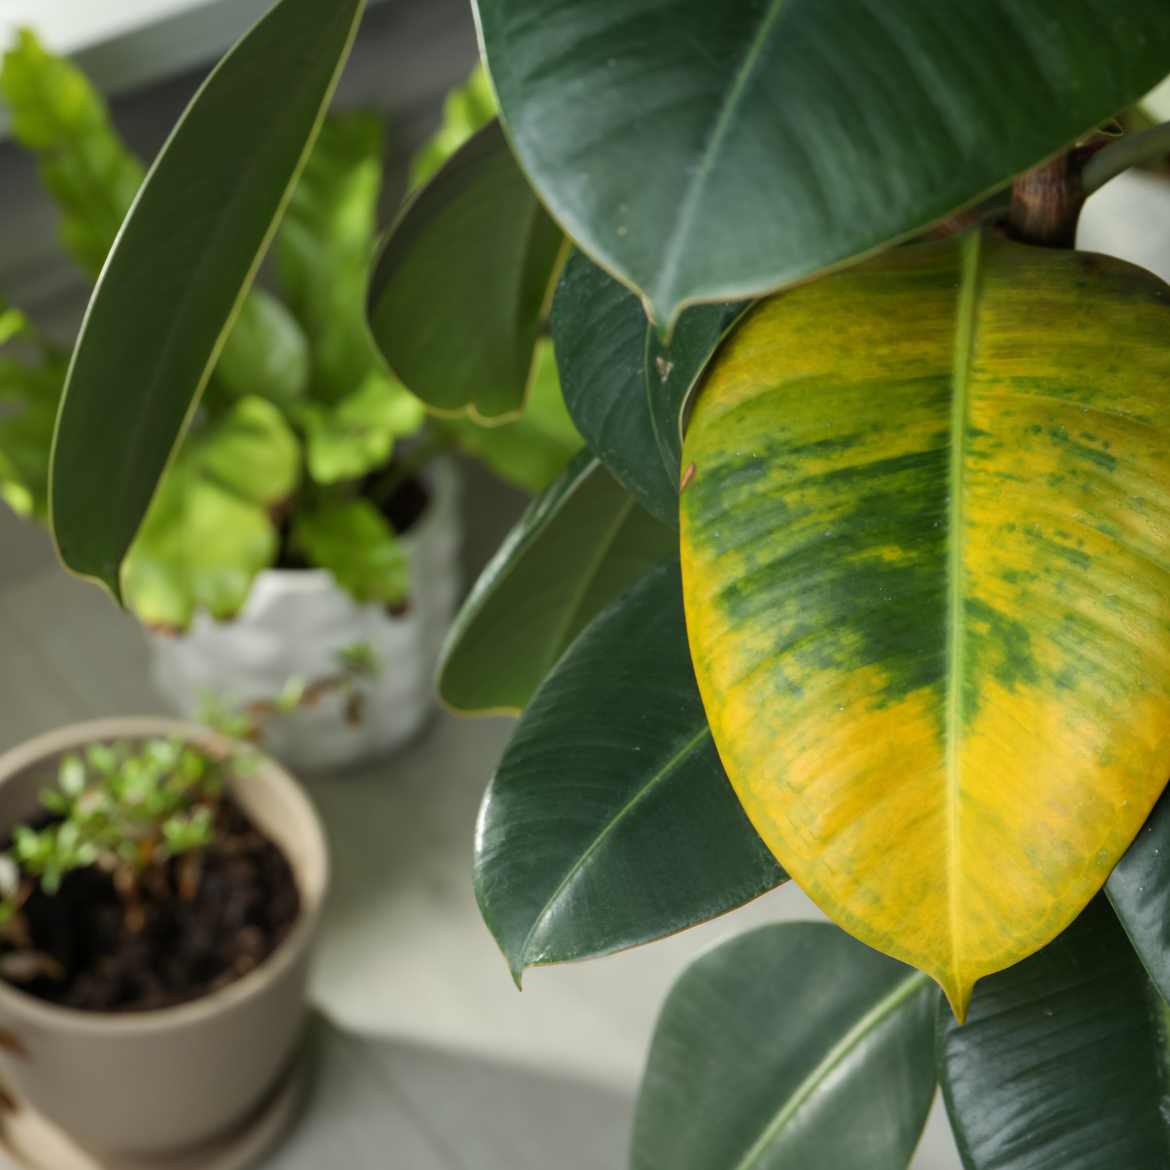 How to diagnose a sick plant | Bunnings Workshop community